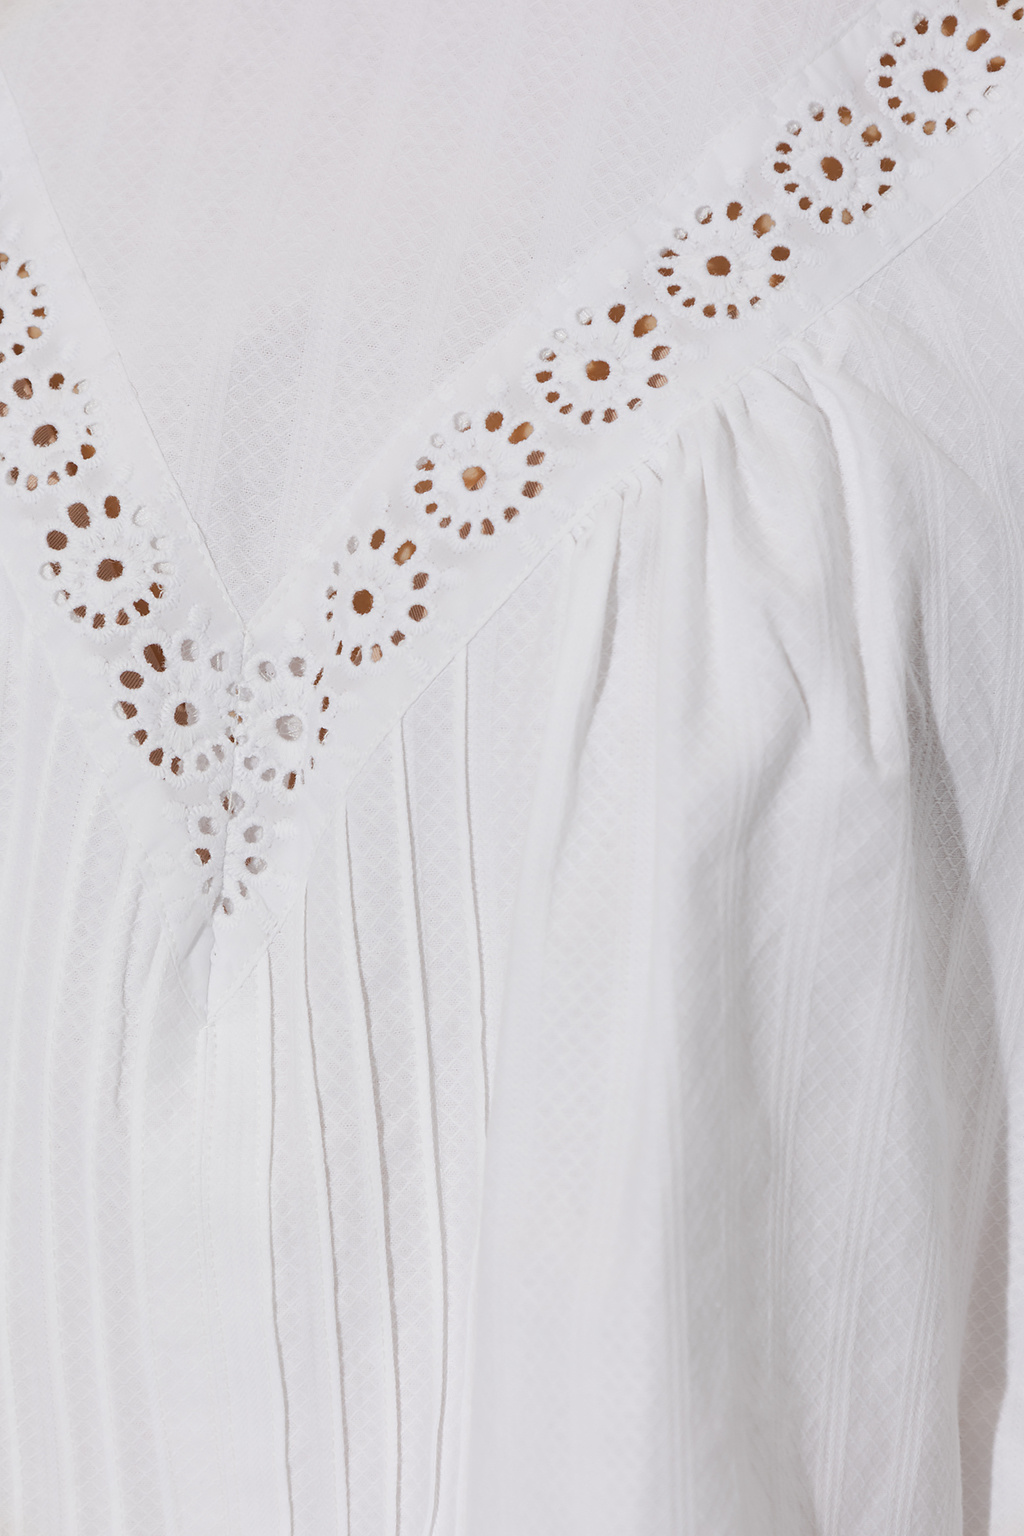 See By Chloé Embroidered top